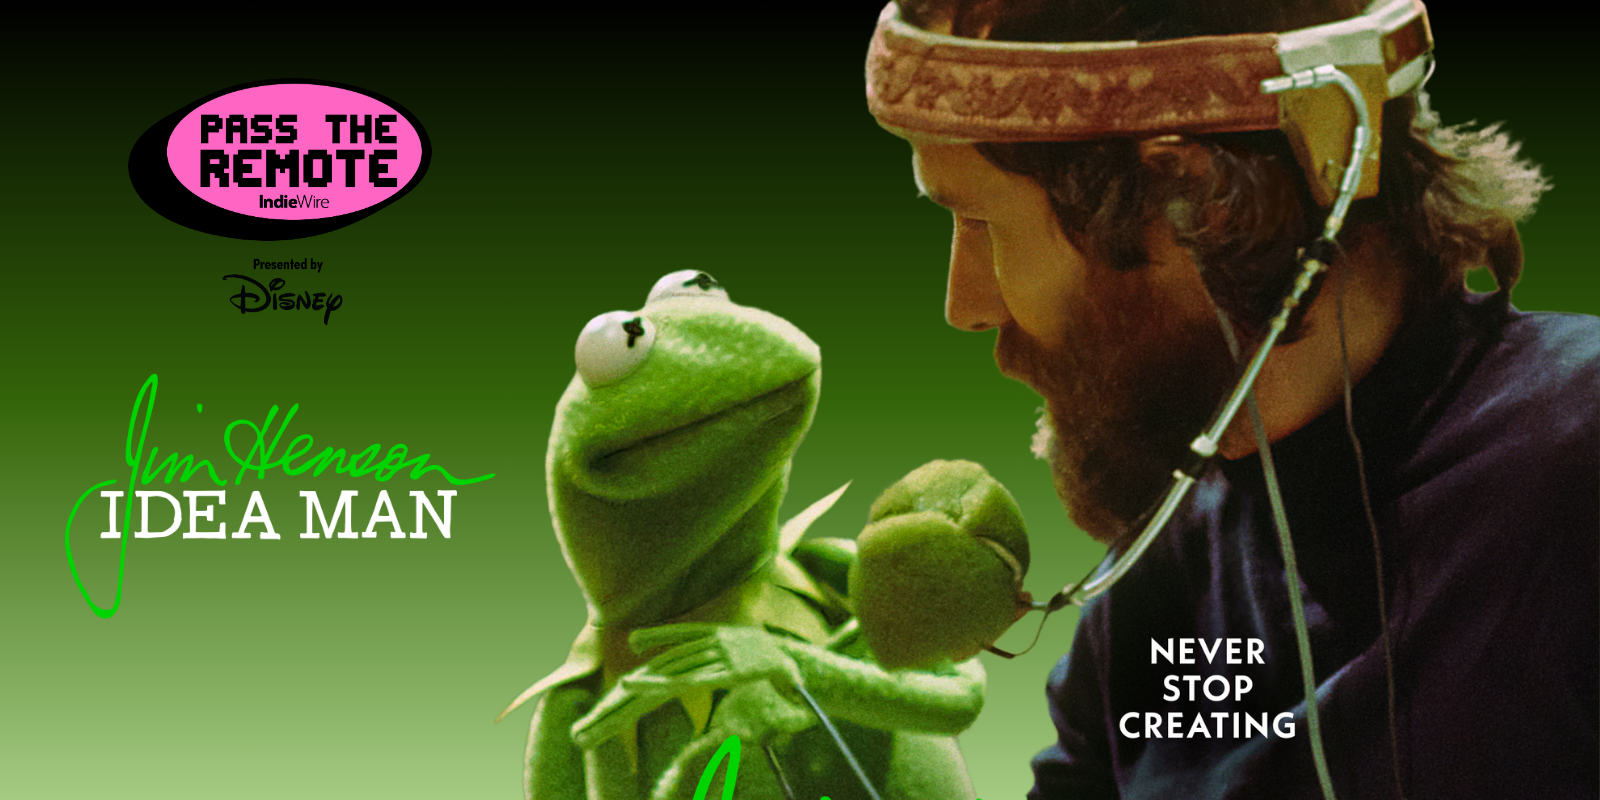 Join IndieWire and Disney for Our FYC ‘Jim Henson Idea Man’ Panel on May 24 at Vidiots in LA